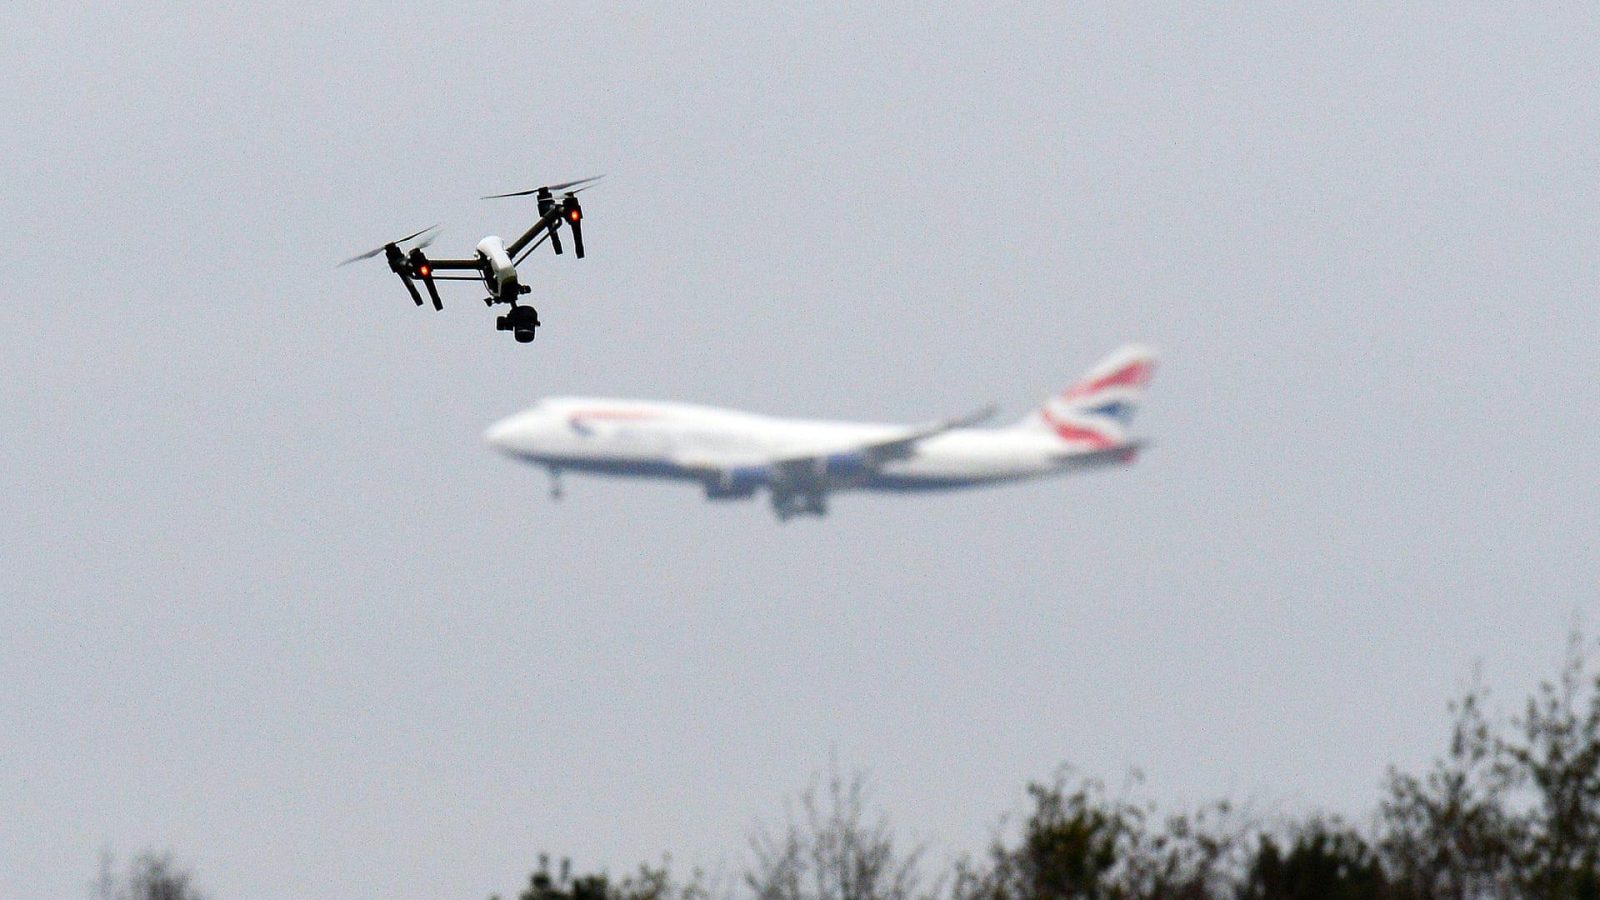 Drones disrupt flights near East Midlands Airport in the UK